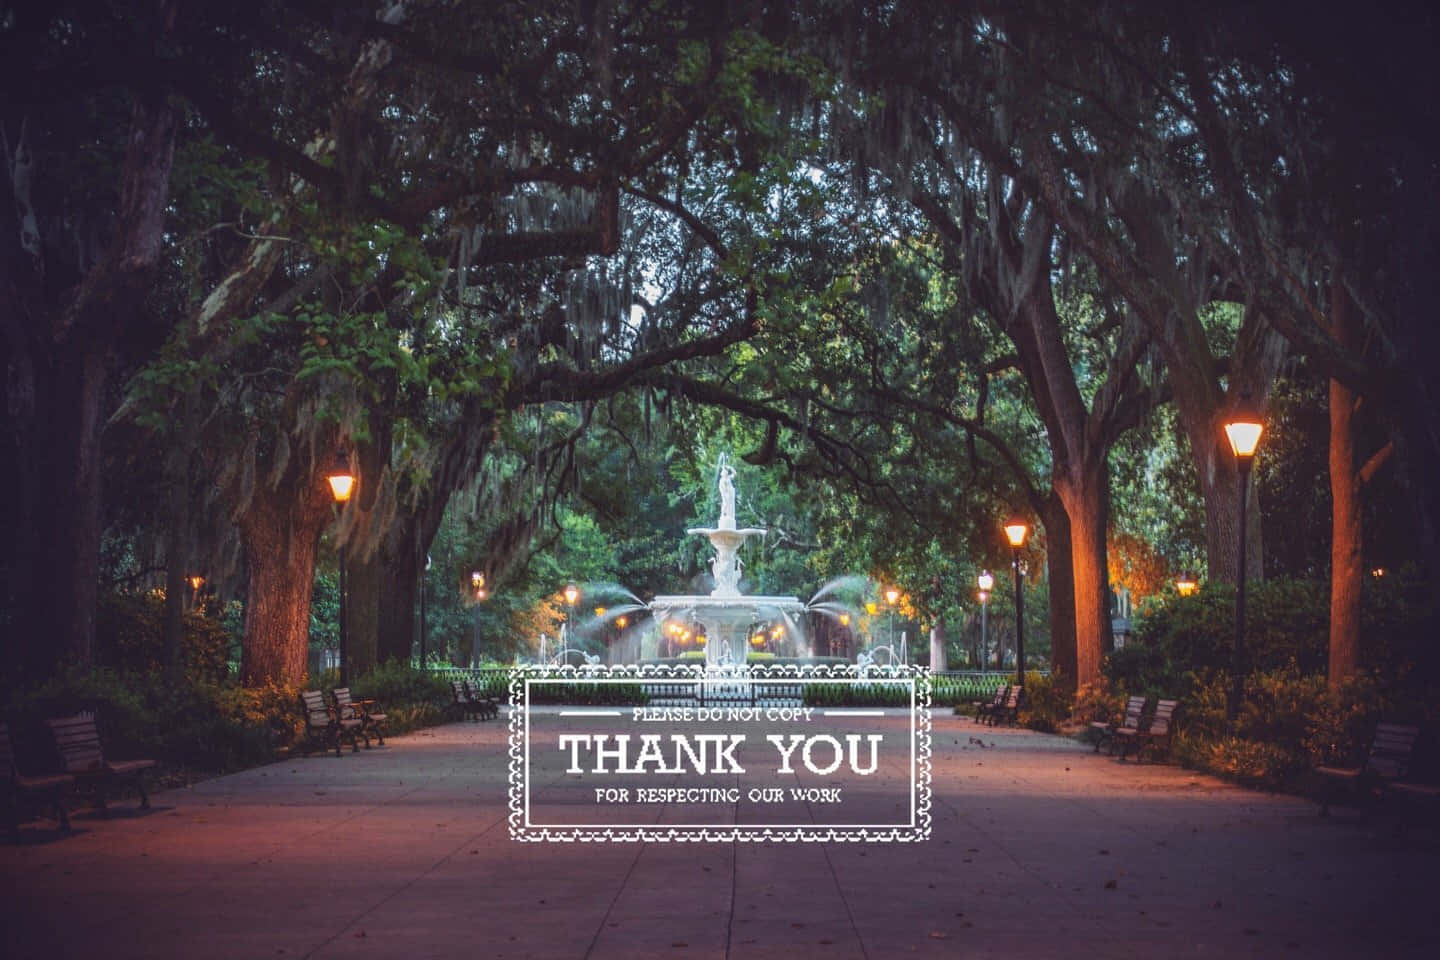 Thank You Card In A Park With Trees And Fountain